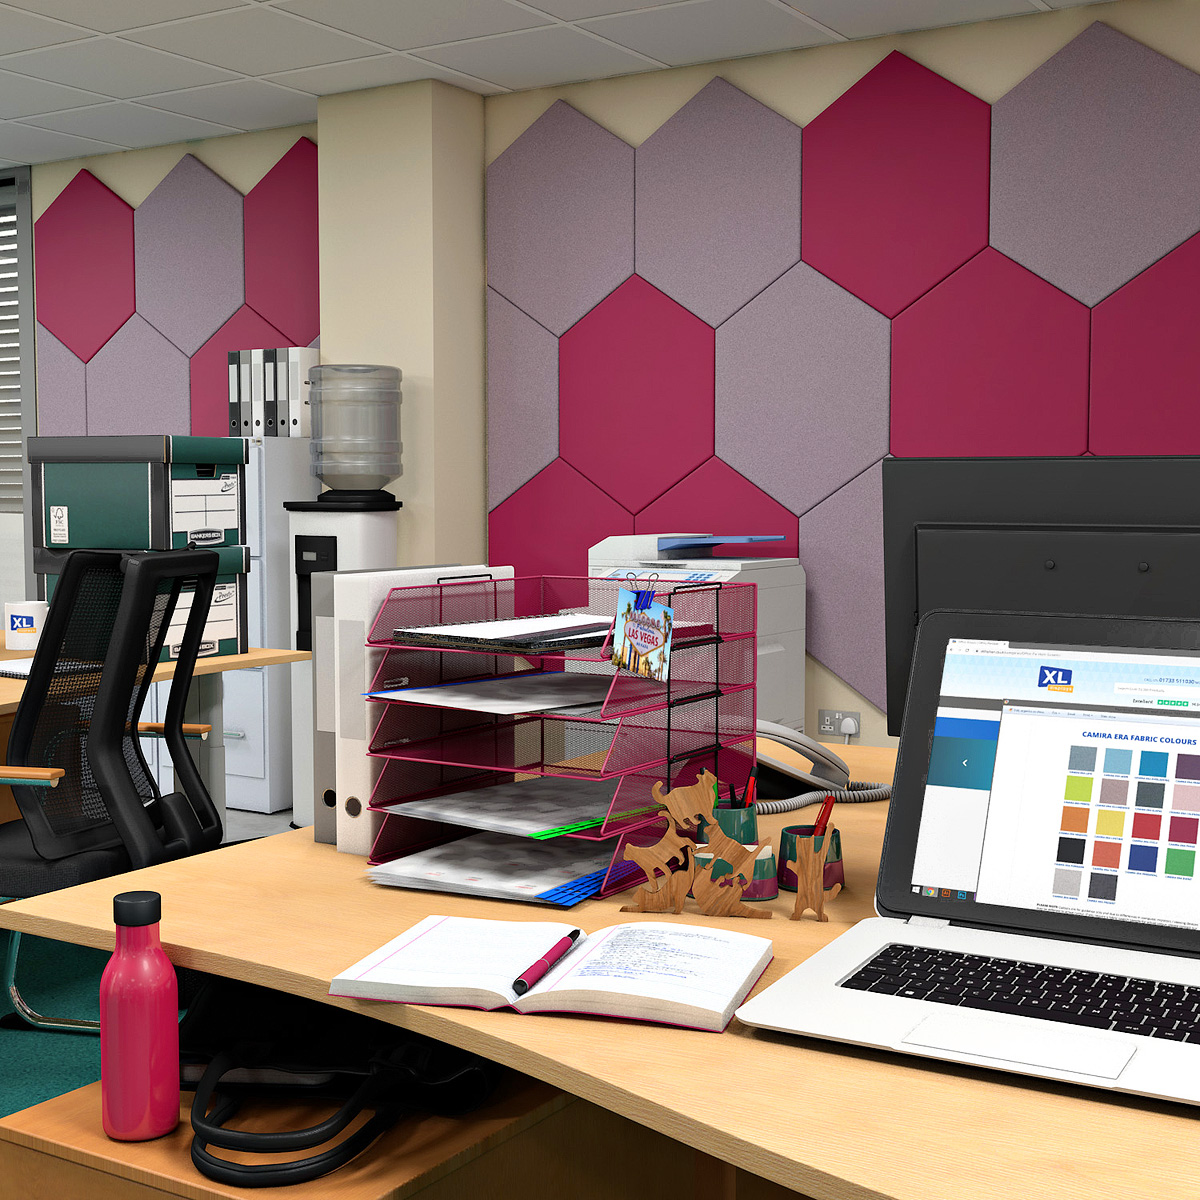 ZENARTRO™ Diamond Shape Acoustic Wall Panelling Reduces Office Noise & Distractions By Absorbing Sound Reverberations 